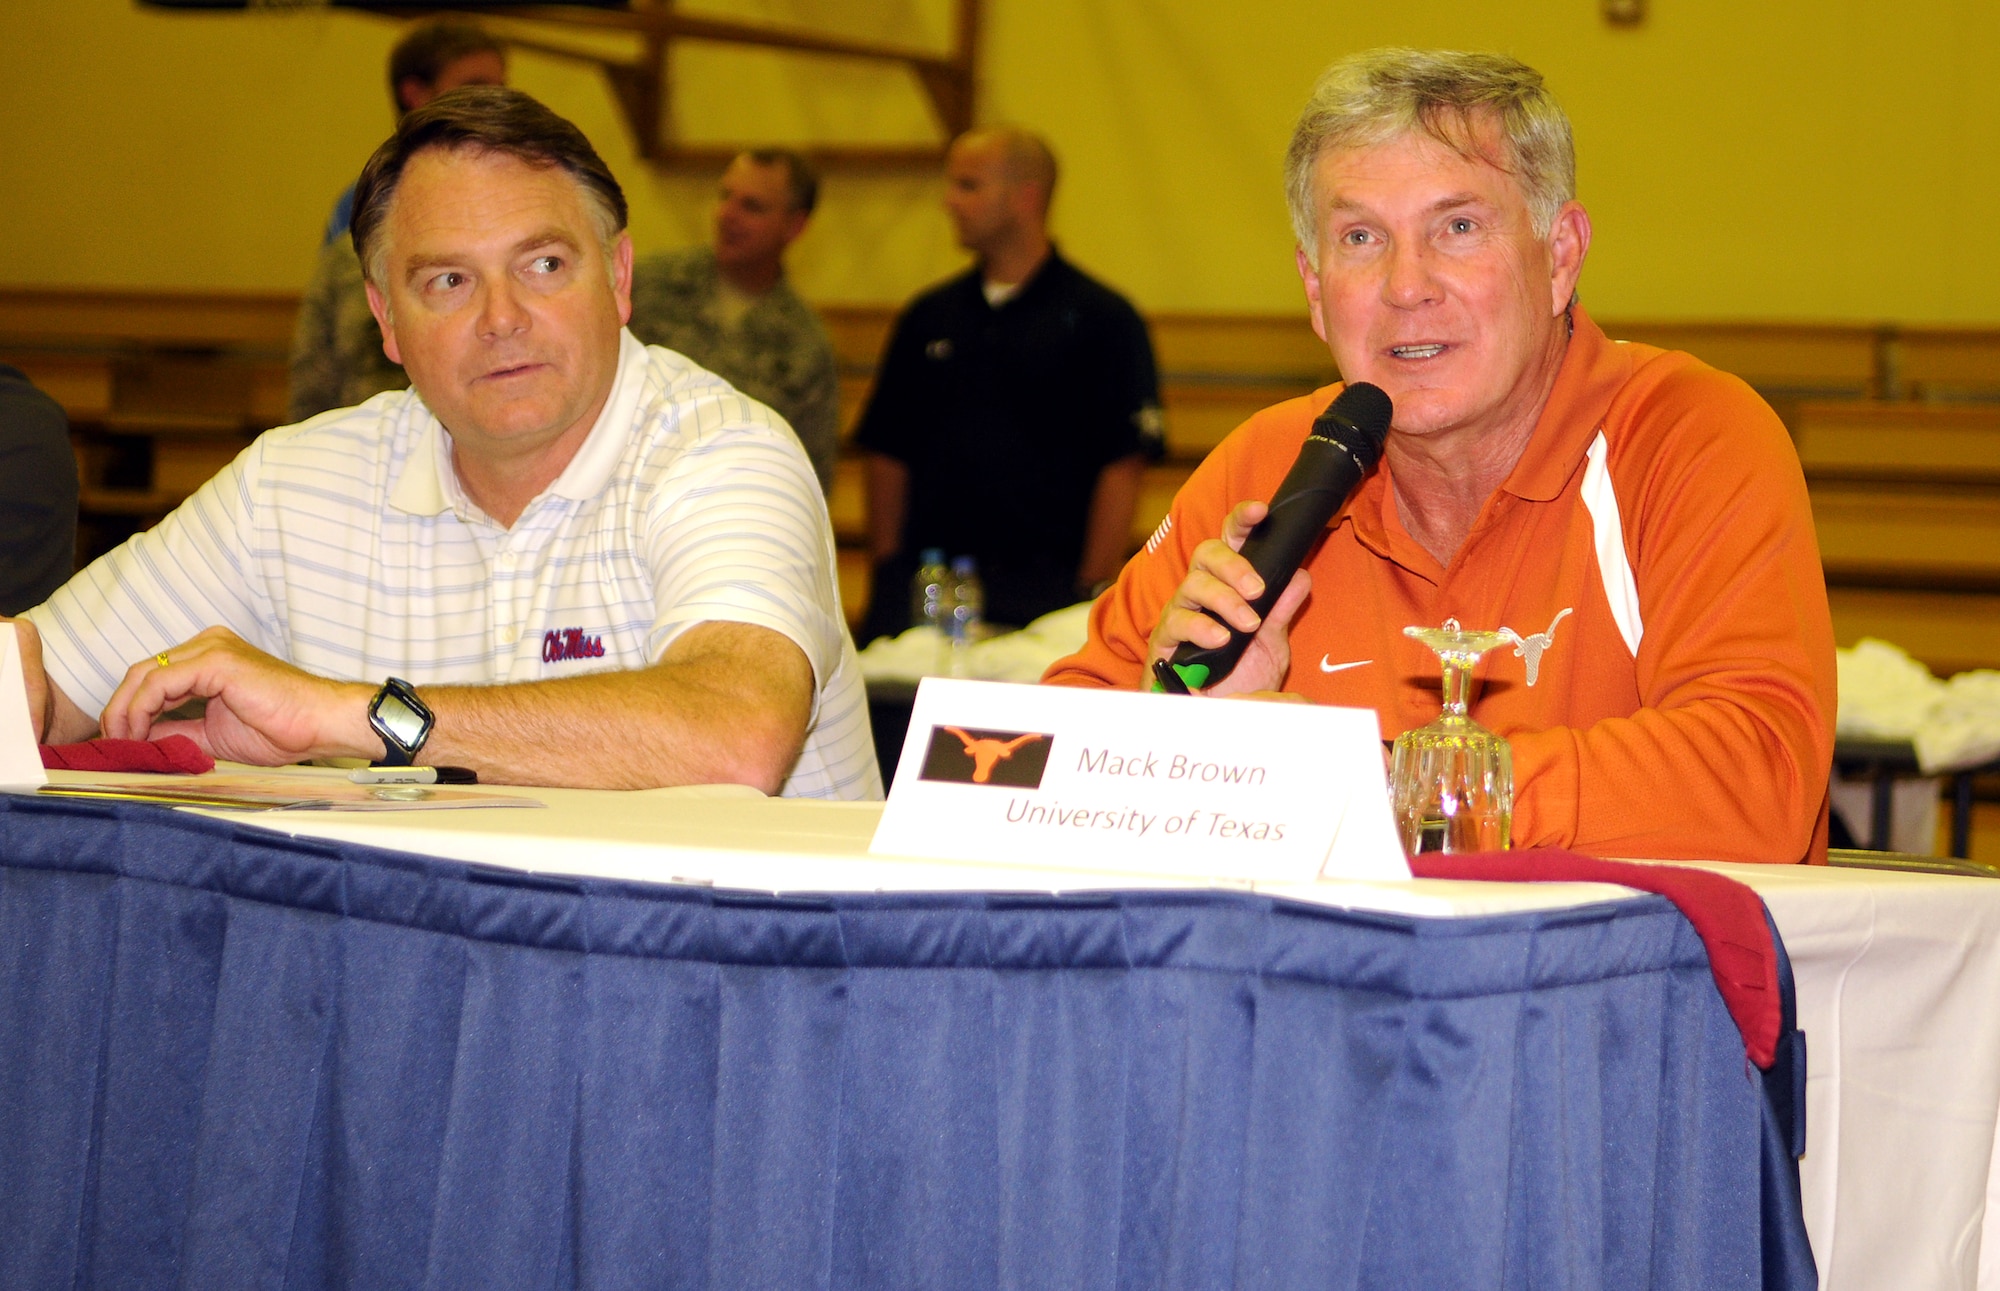 University of Texas head football coach Mack brown answers fans’ questions alongside University of Mississippi head football coach Houston Nutt during a Q&A session at the fitness center here on their visit to base Saturday, May 30, 2009. Their visit was part of the Armed Forces Entertainment Coaches Tour. Coach Brown was NCAA’s 2008 coach of the year. (U.S. Air Force photo/Airman 1st Class Alex Martinez)